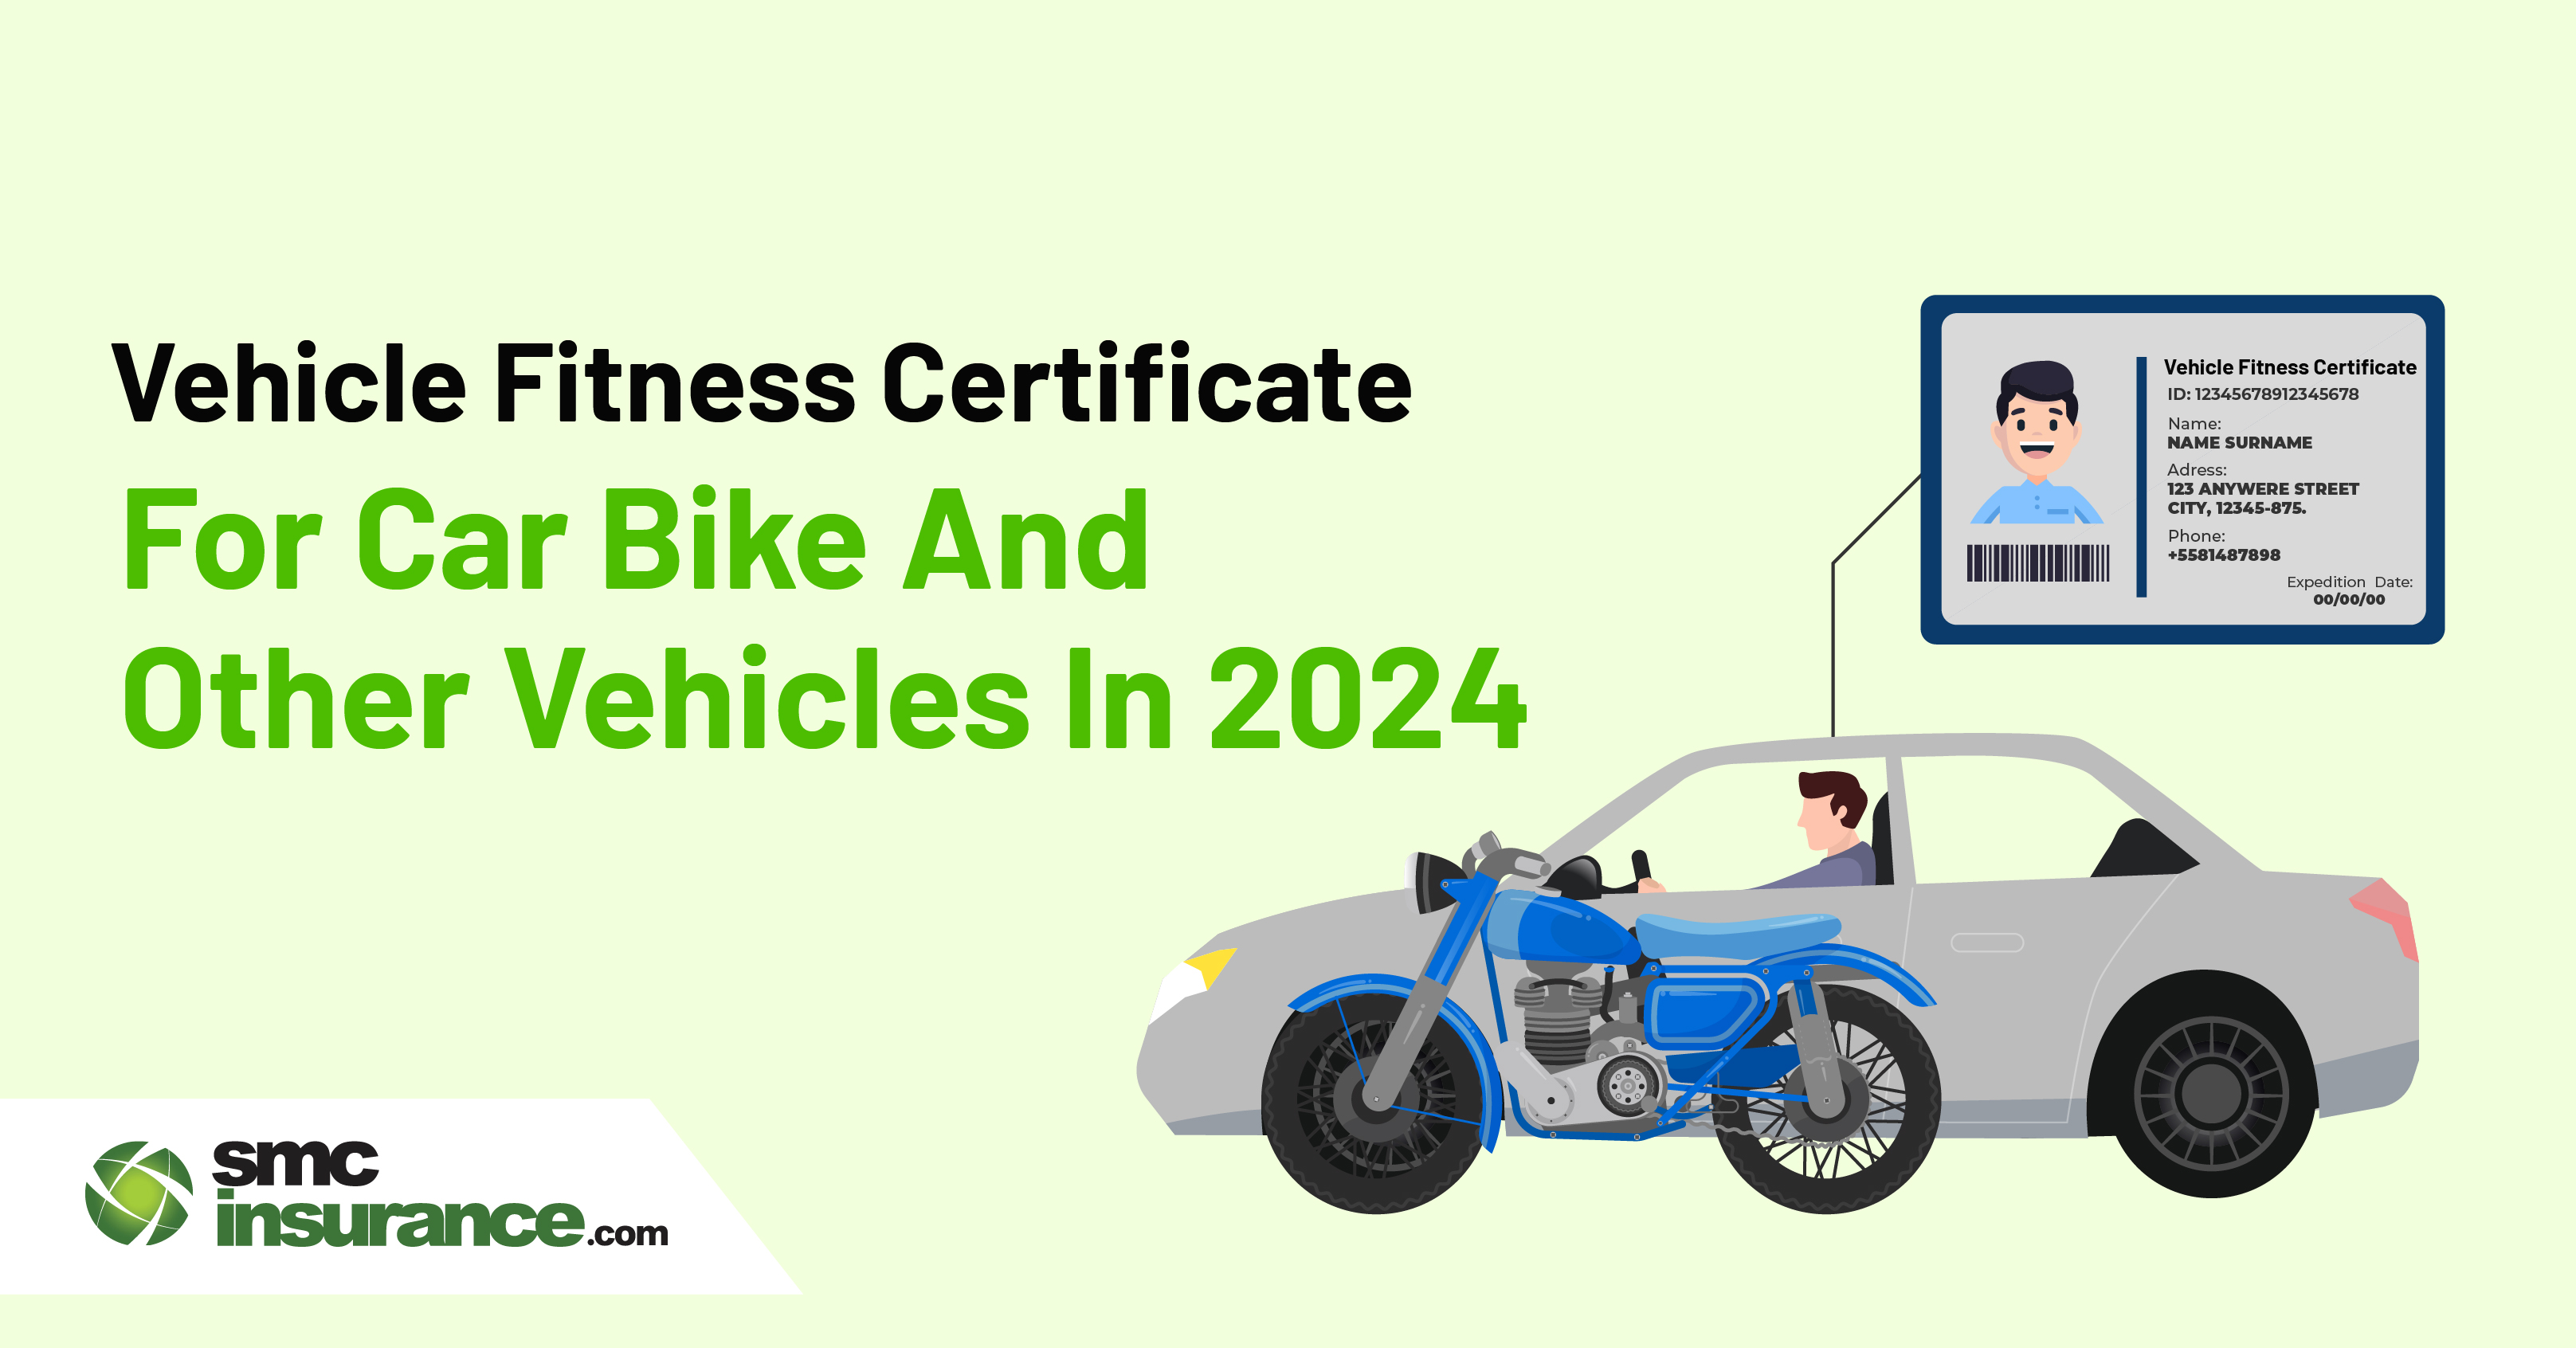 Vehicle Fitness Certificate For Car, Bike And Other Vehicles In 2024